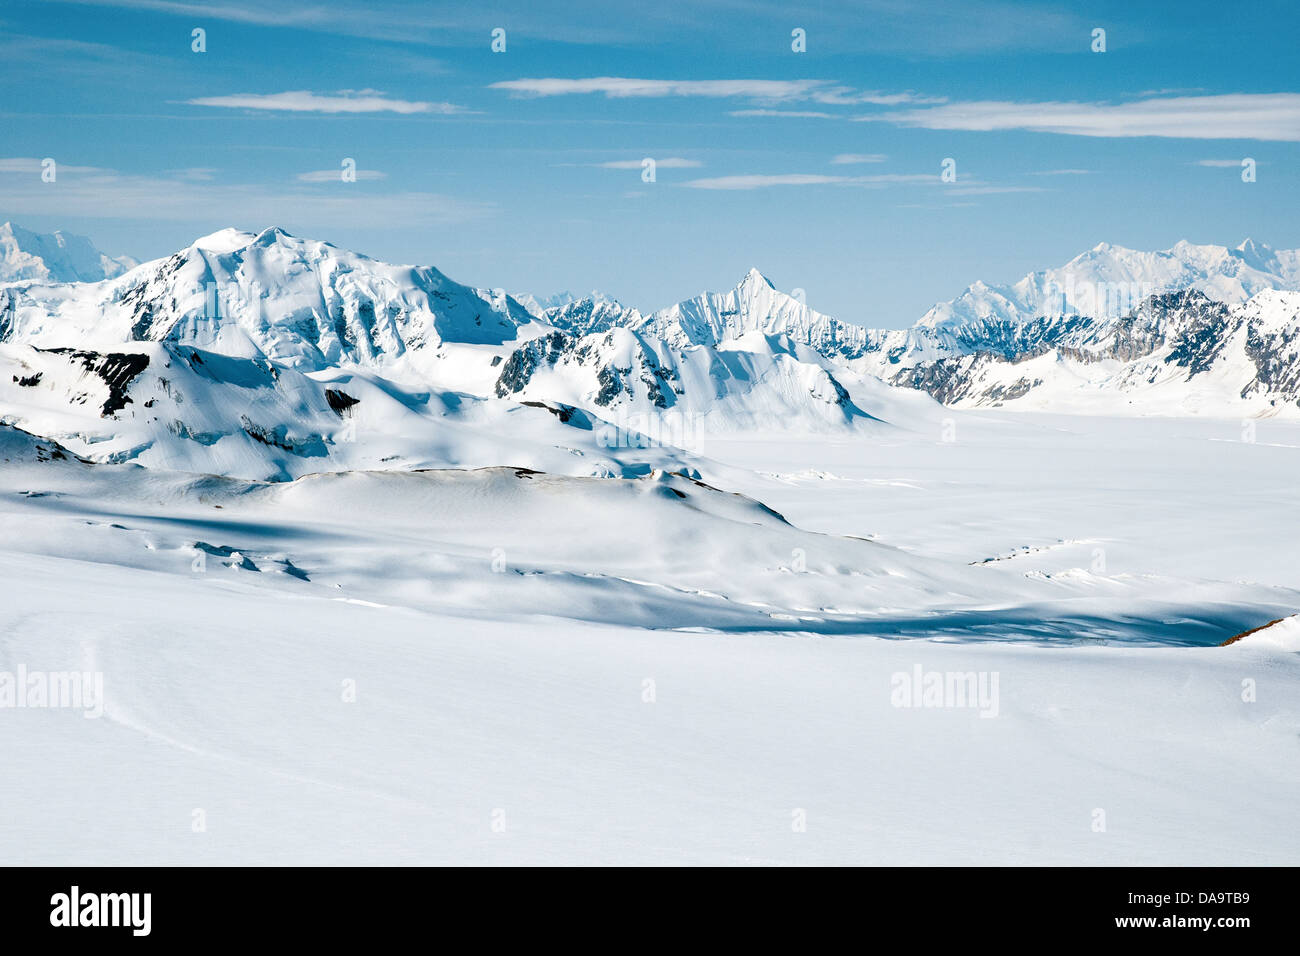 A view of the icefields of the St. Elias mountain range in Kluane National Park, Yukon Territory, Canada. Stock Photo